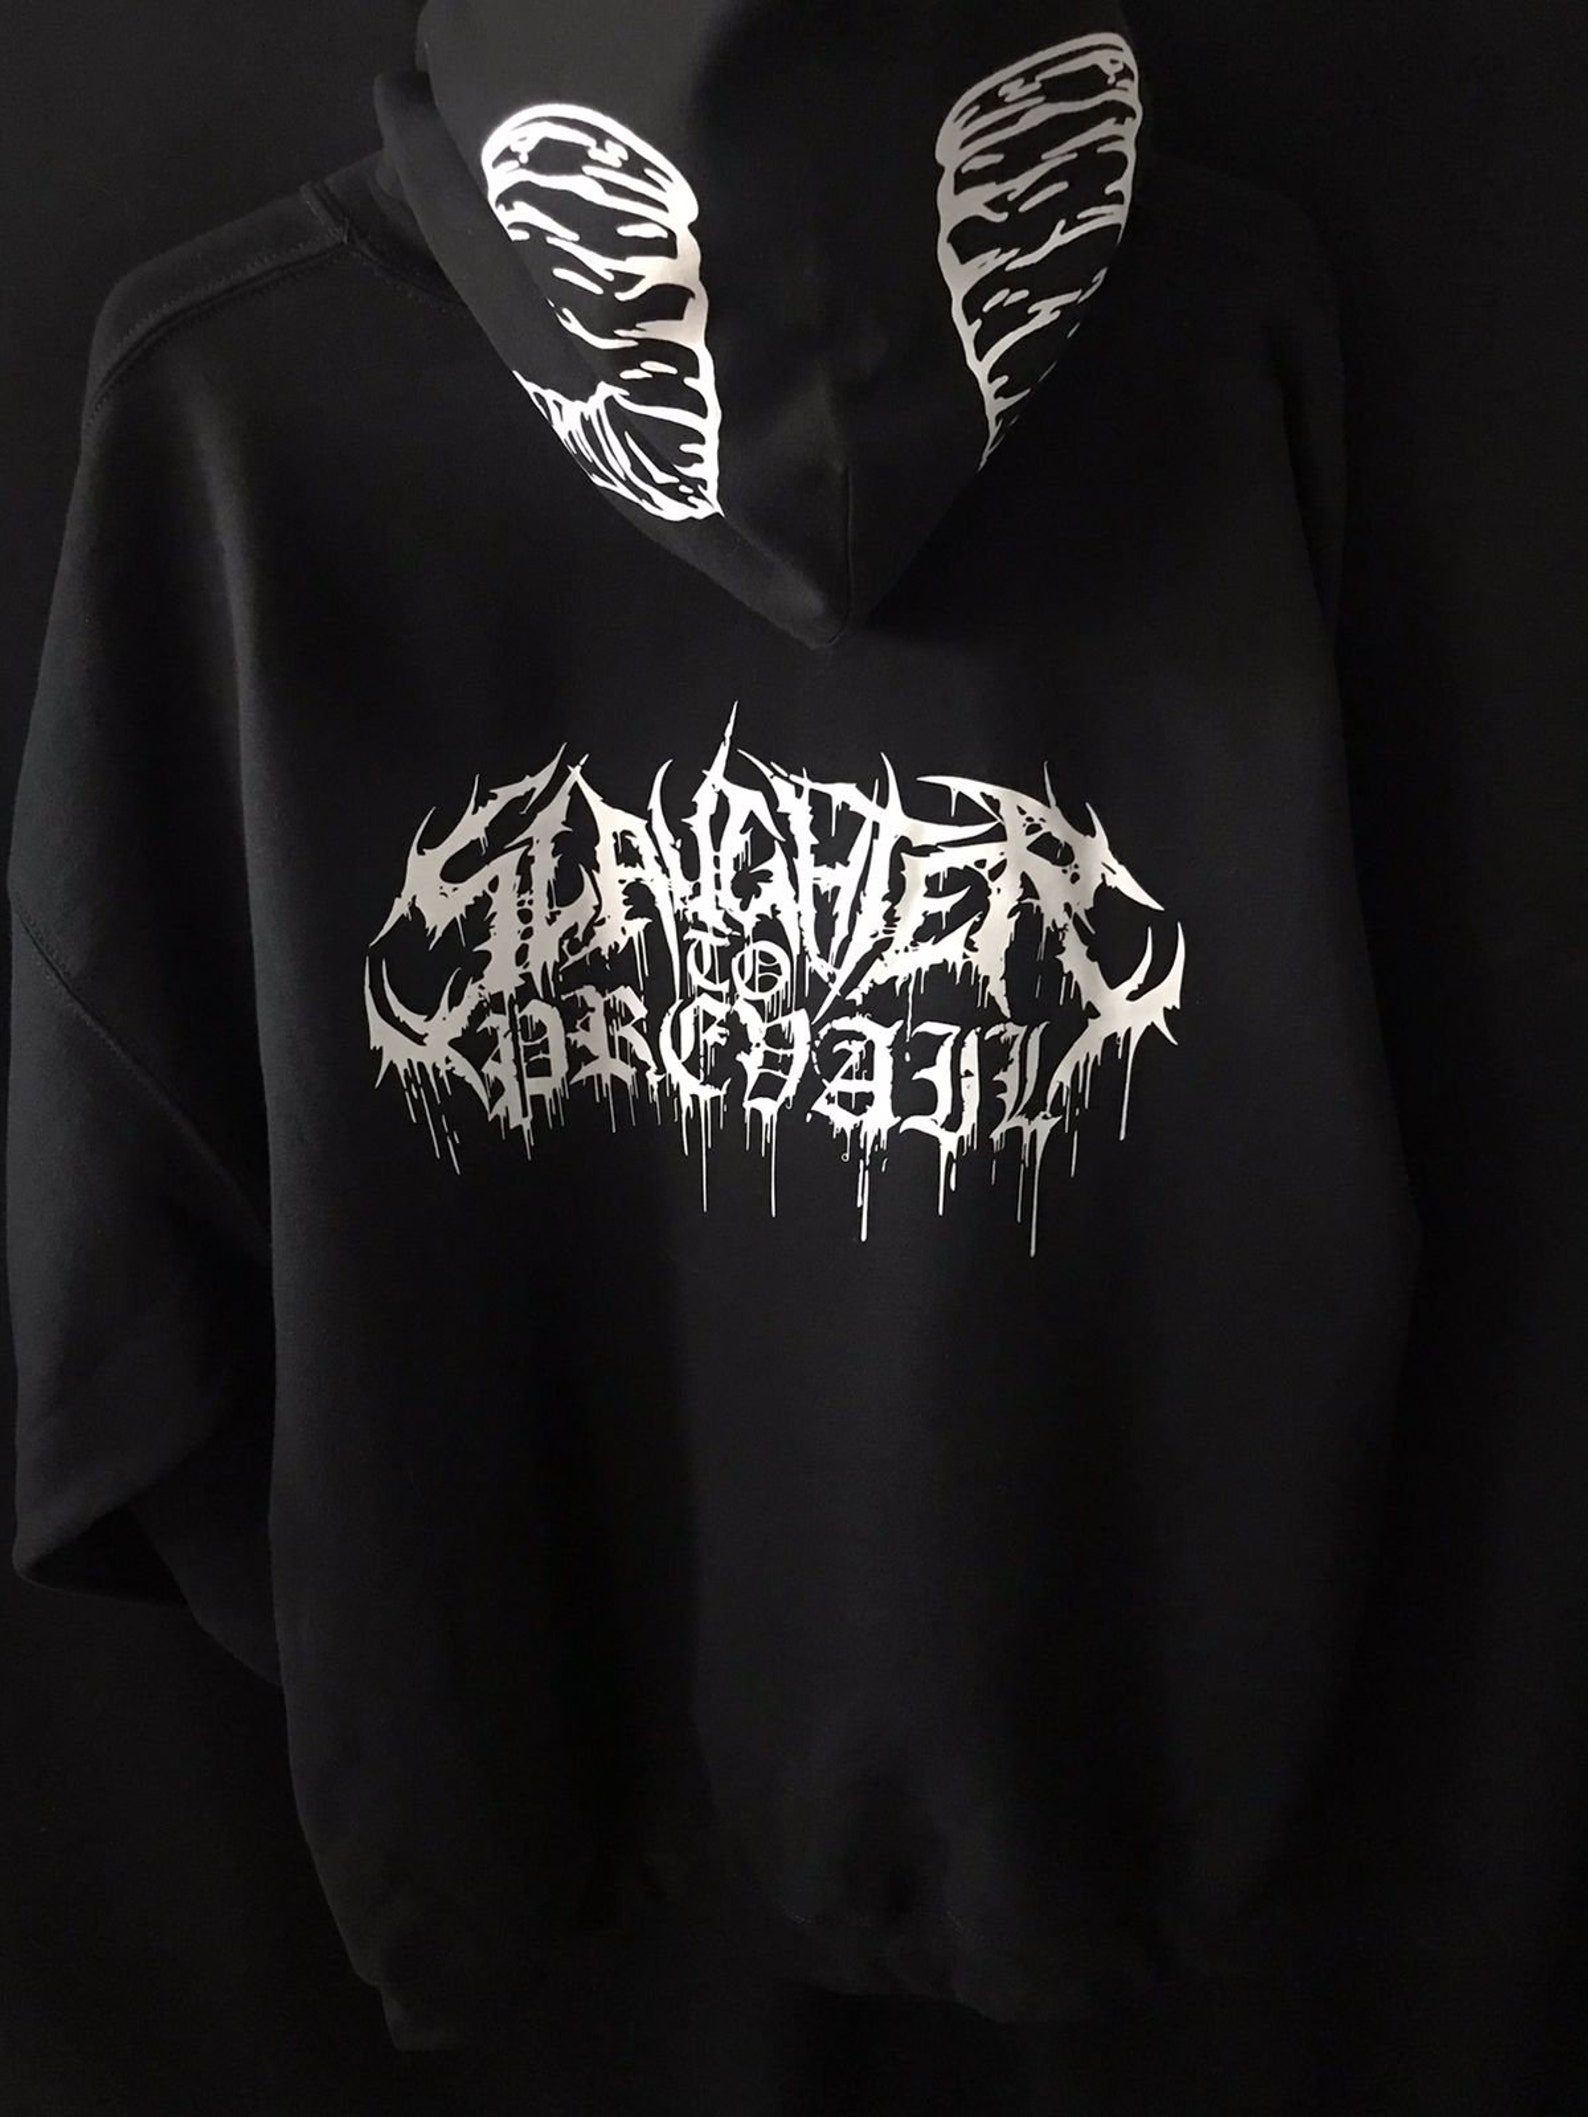 Slaughter to Prevail Deathcore Sweatshirt Metal Black - Etsy